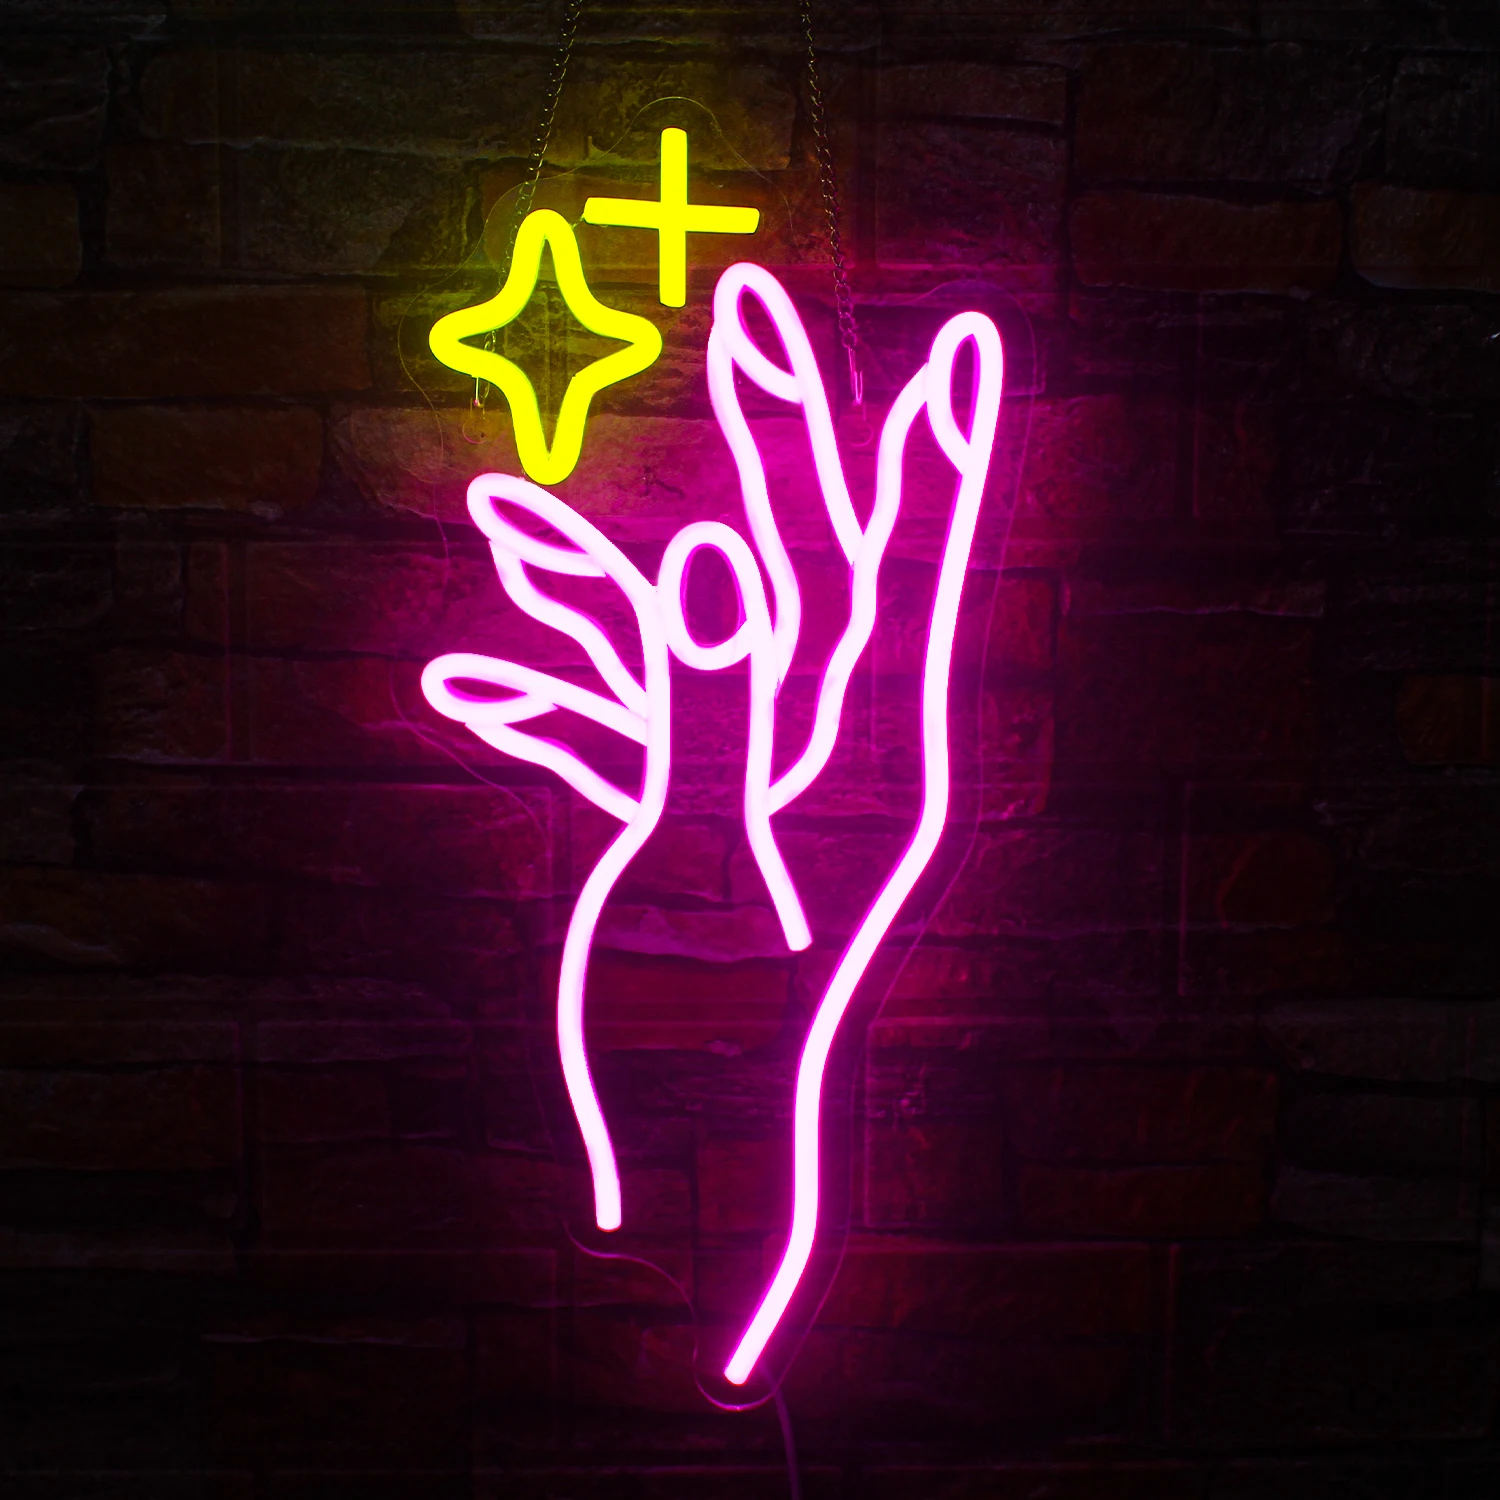 Yellow Star Hand Neon Sign Pink Nail Led Signs Wall Decor for Bedroom Girls Room Nail Salon Beauty Room Decoration Led Neon take a seat sweet cheeks led neon sign usb powered neon lights for beautyroom salon decor home party room home decoration gifts